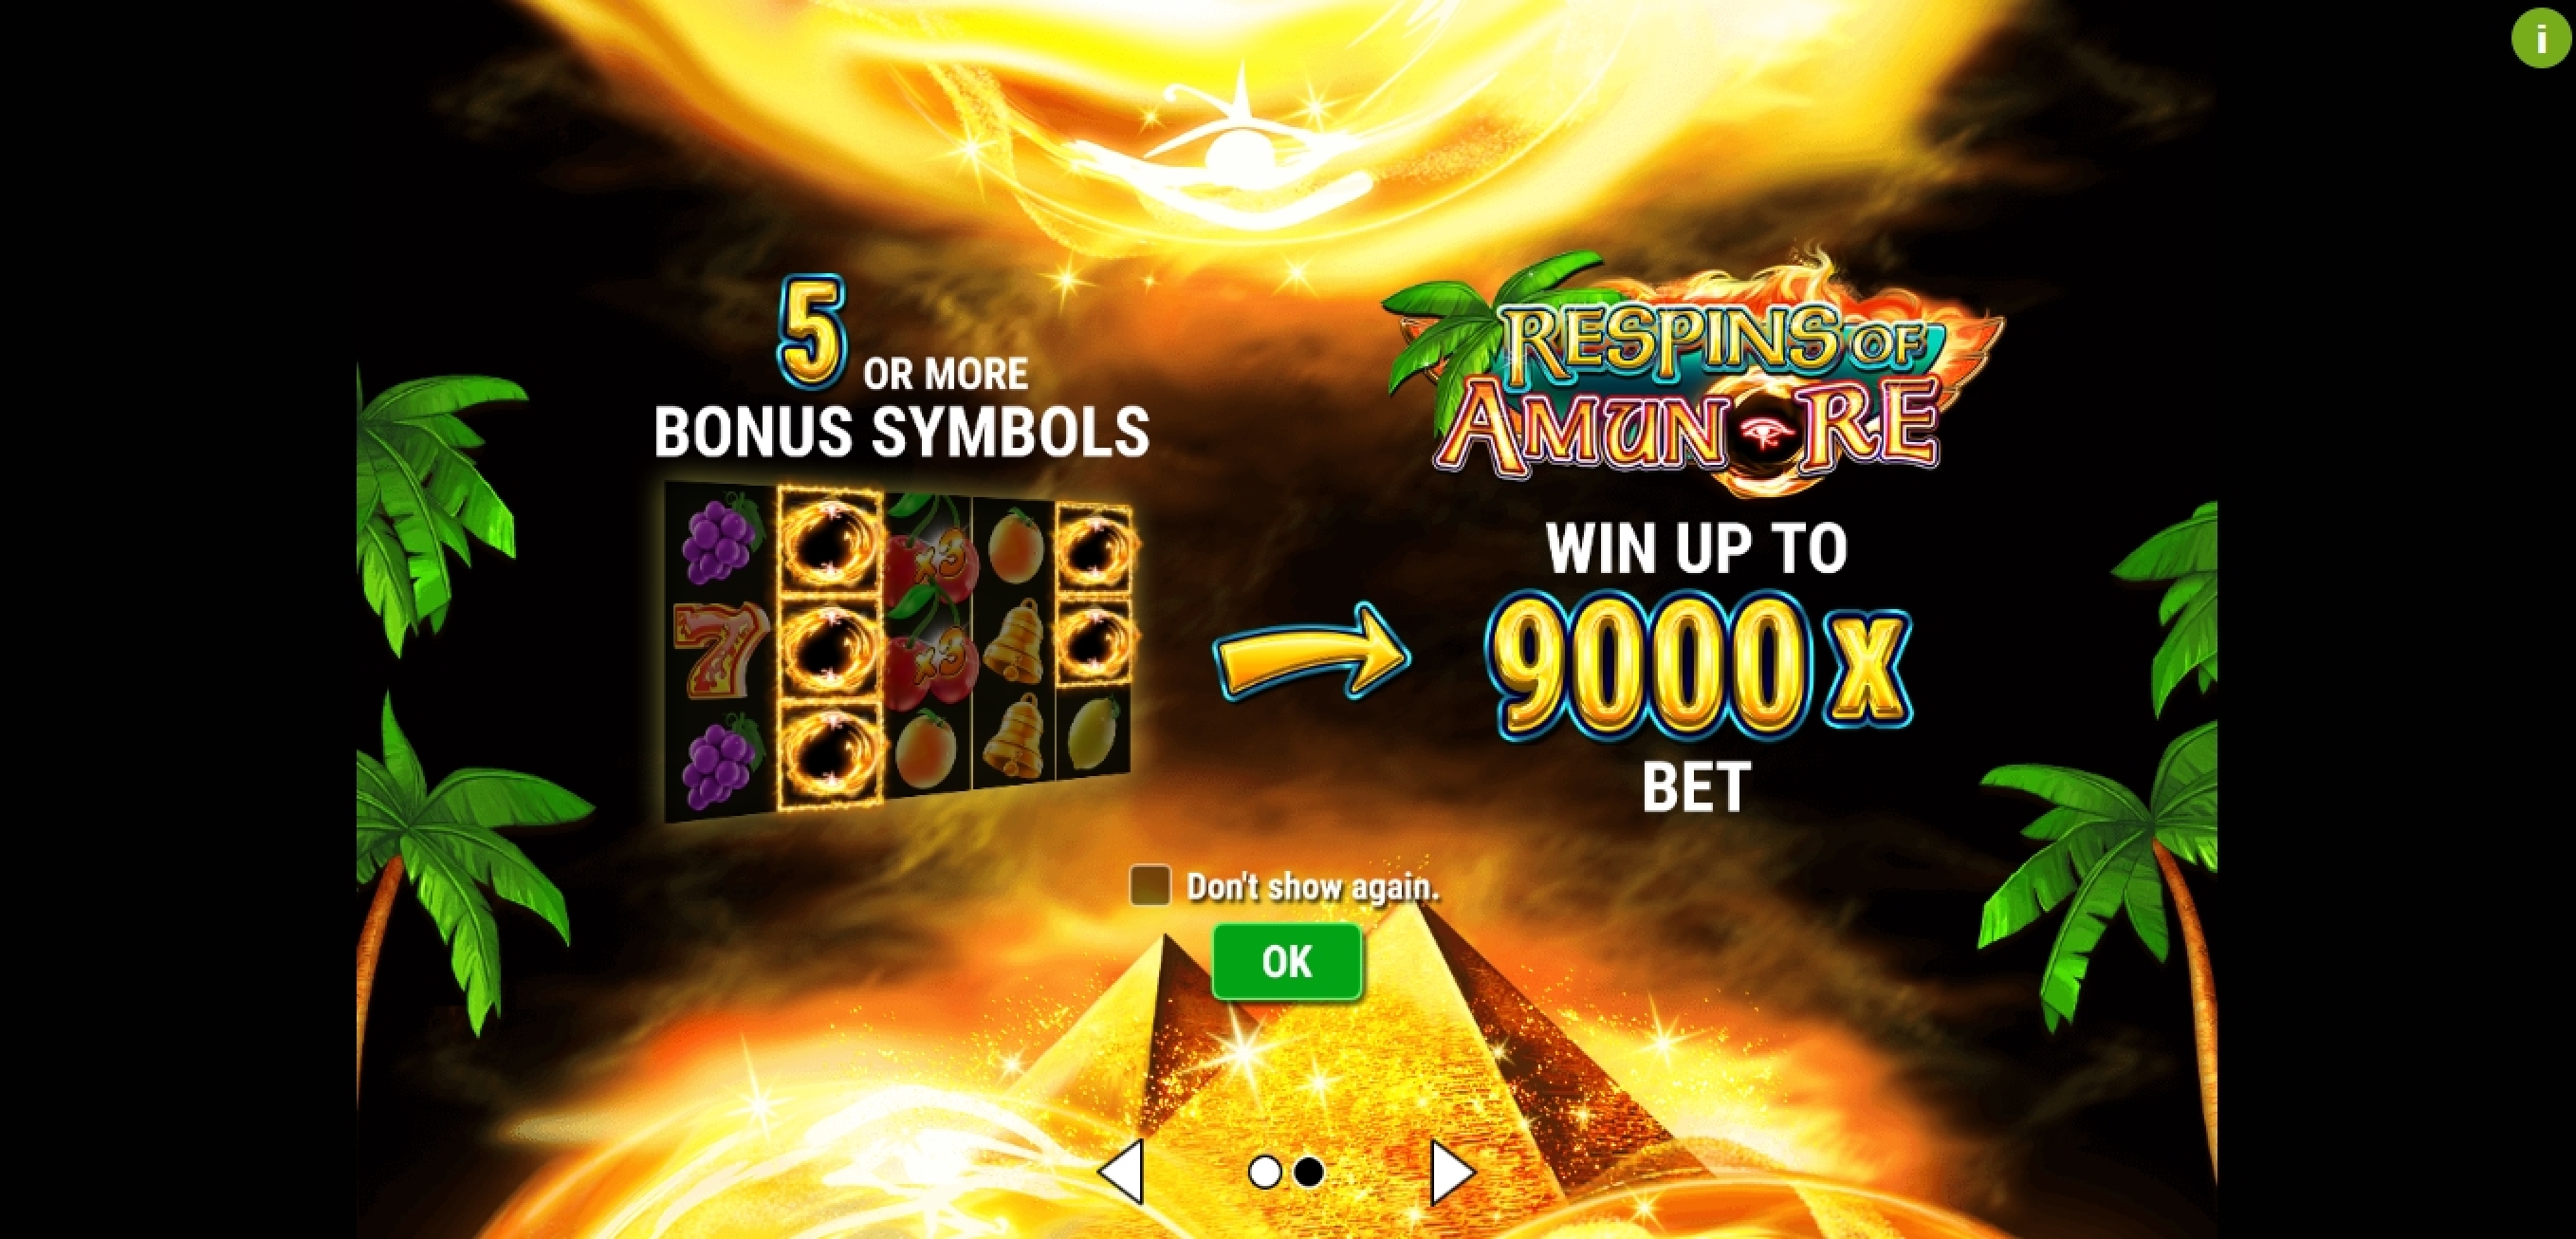 Play Back to the Fruits Respins of Amun-Re Free Casino Slot Game by Gamomat